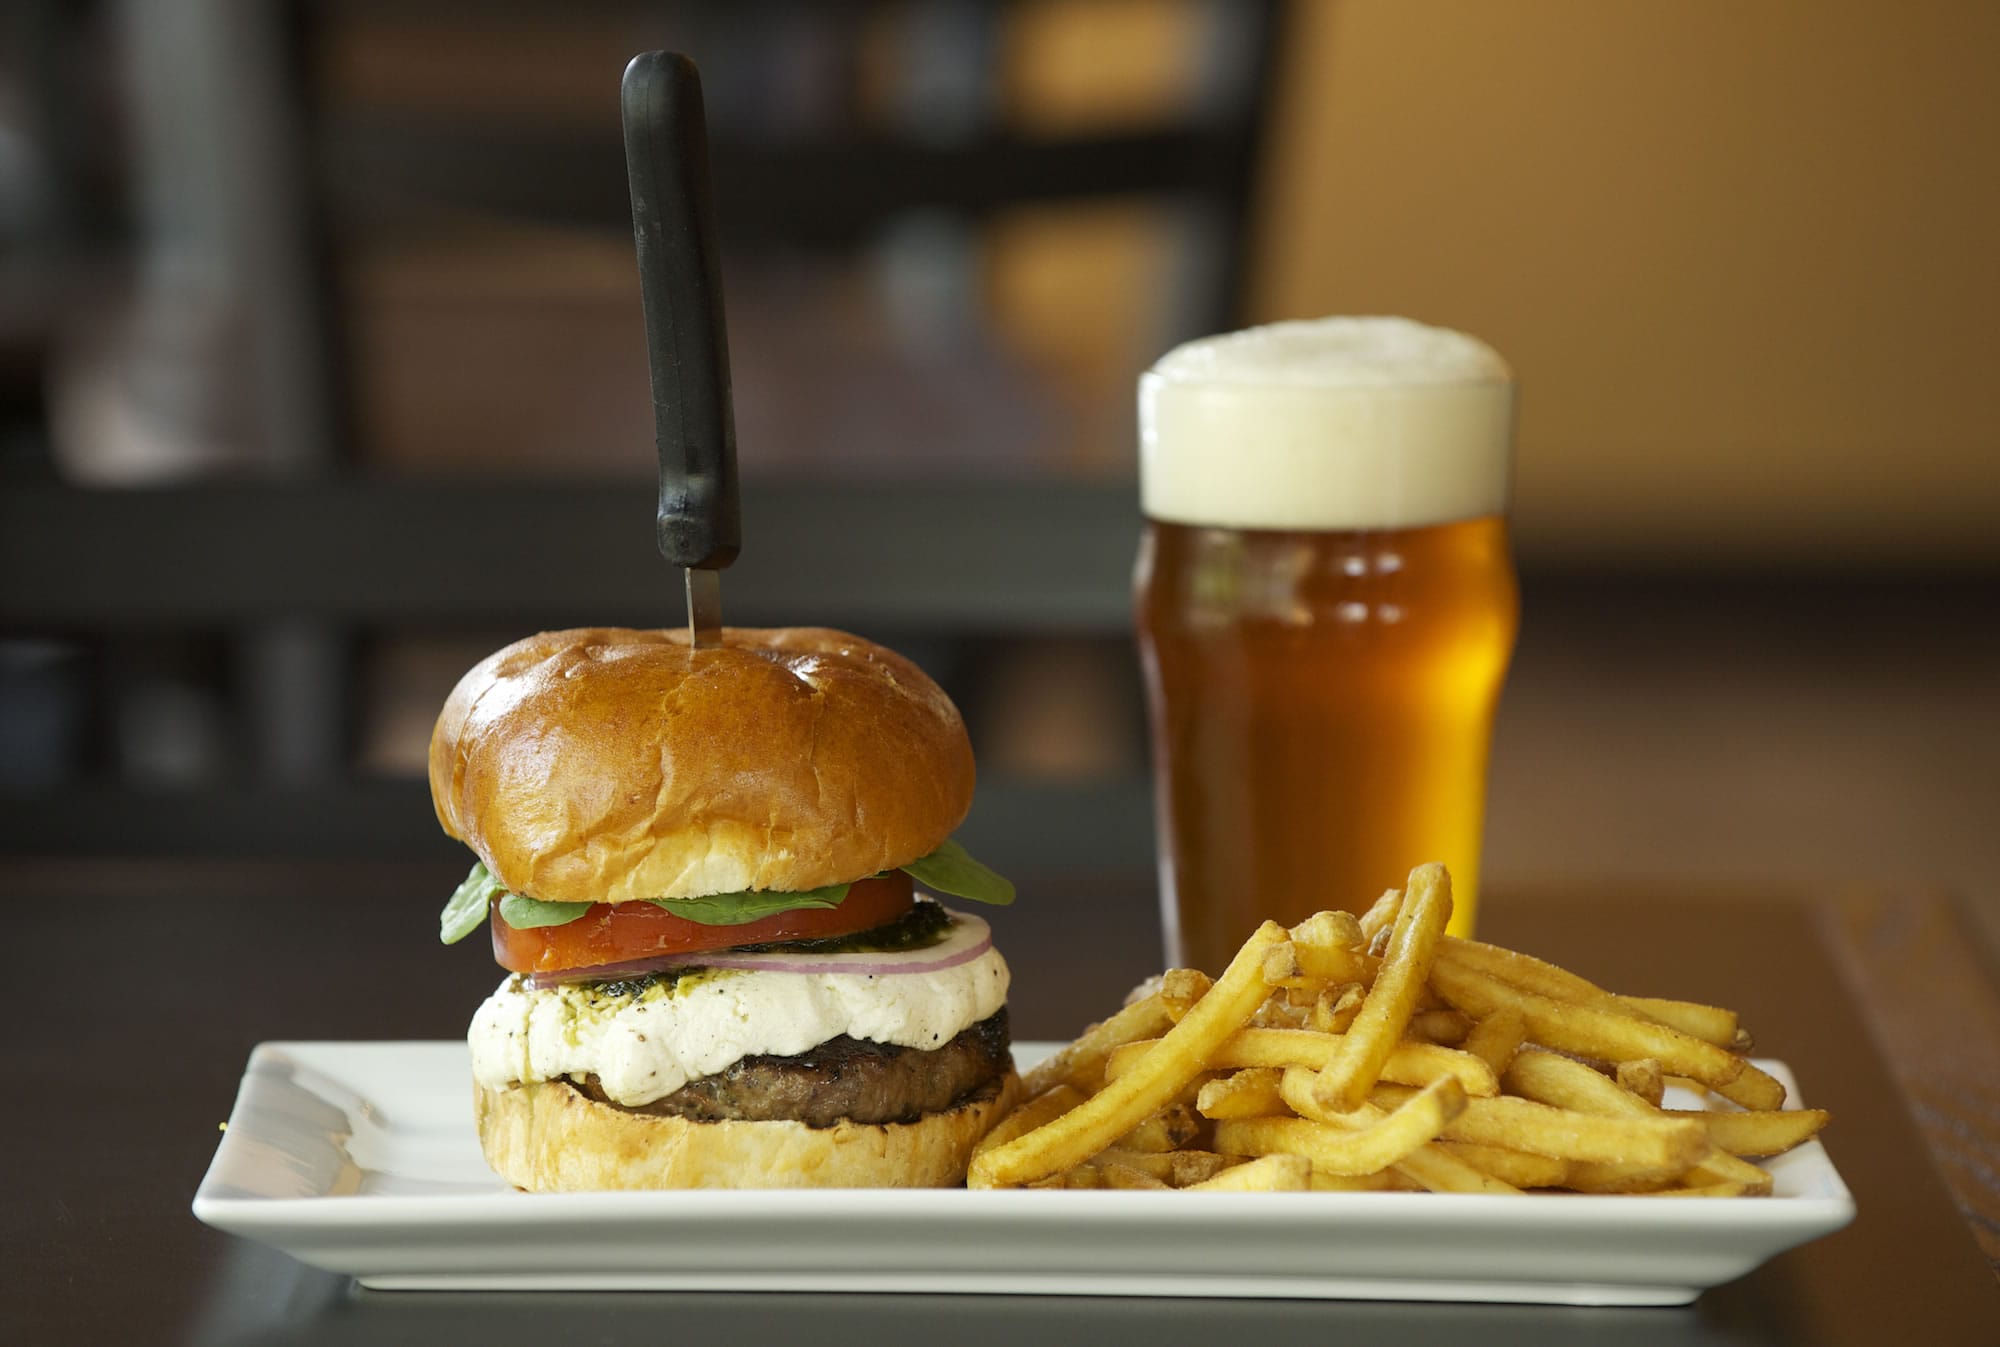 The Mill City lamb burger with fries and beer are among the offerings at Mill City Brew Werks in Camas.